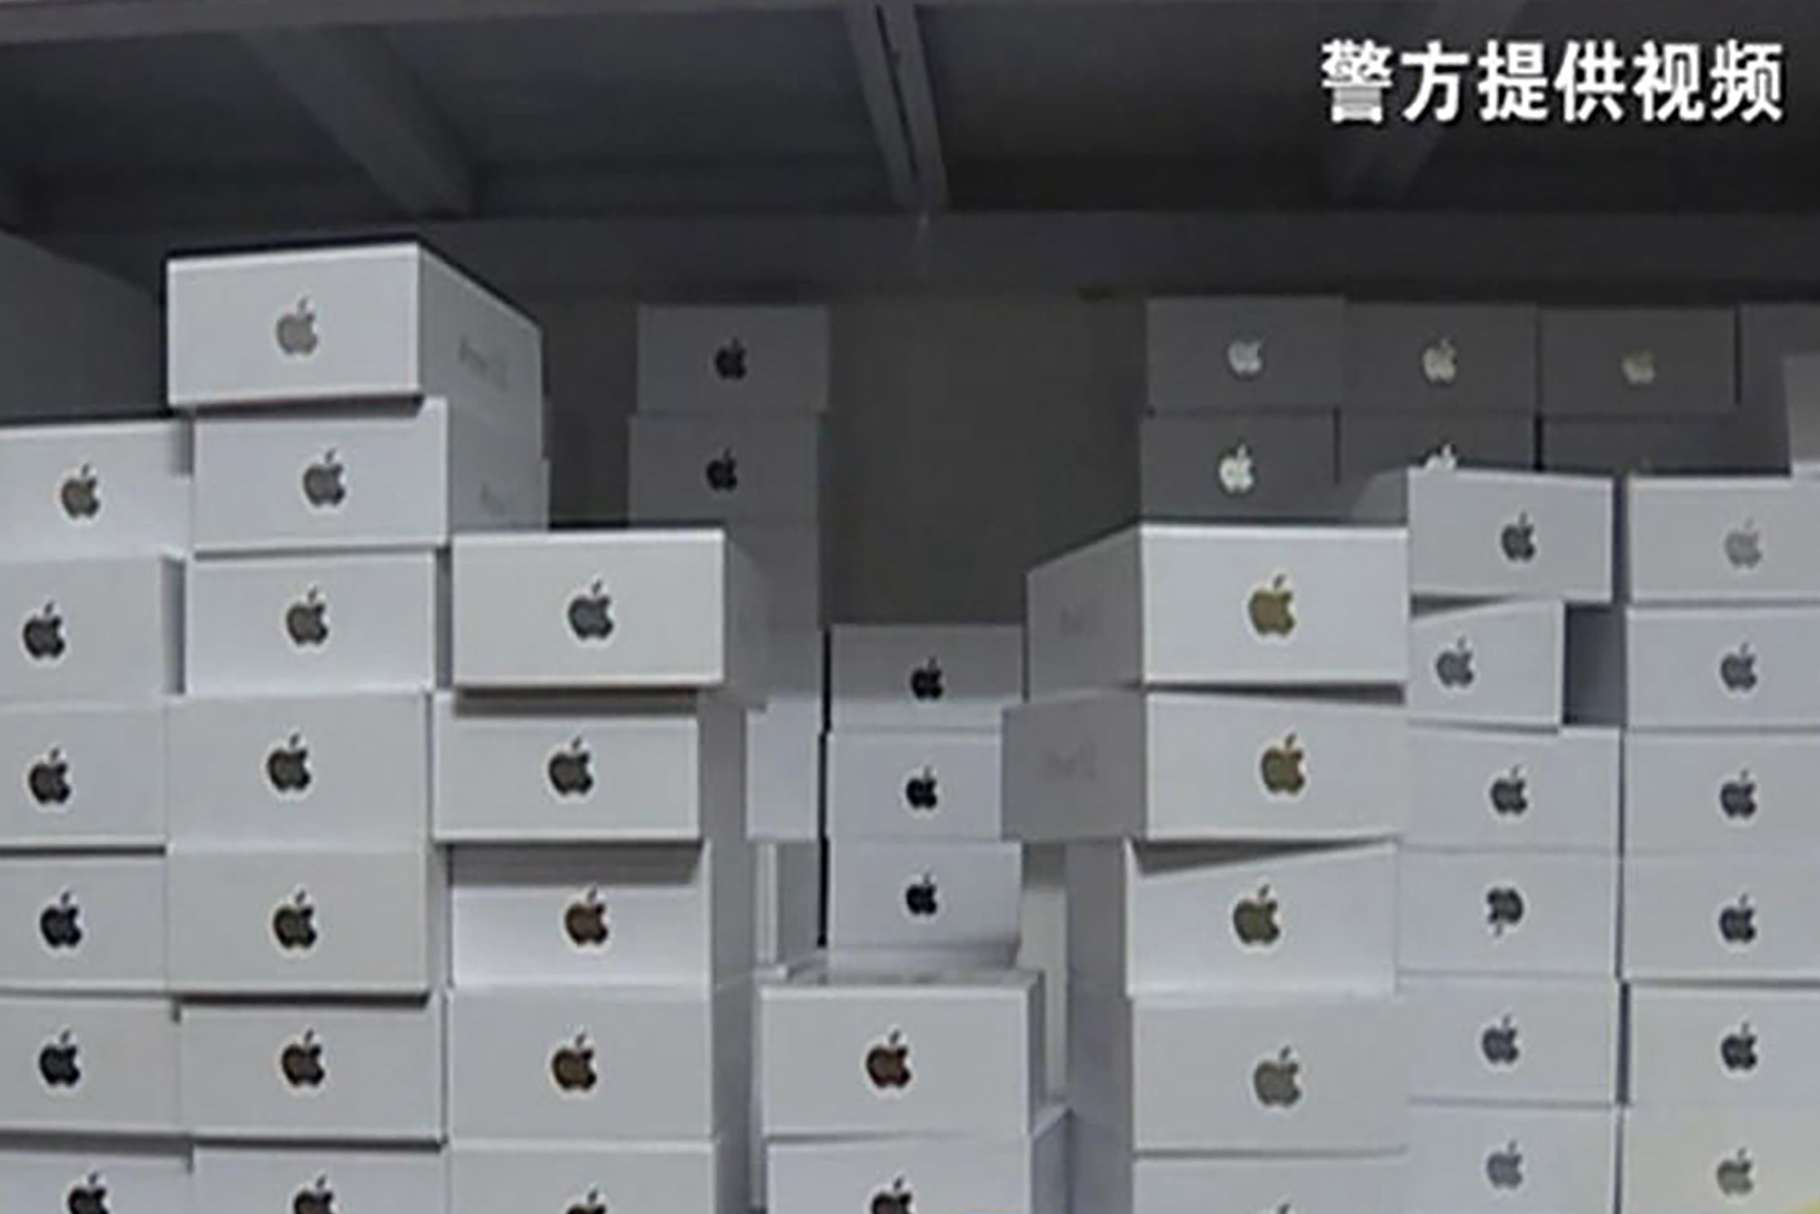 The fake iPhones seized by police in Dongguan, Guangdong province. Photo: 163.com